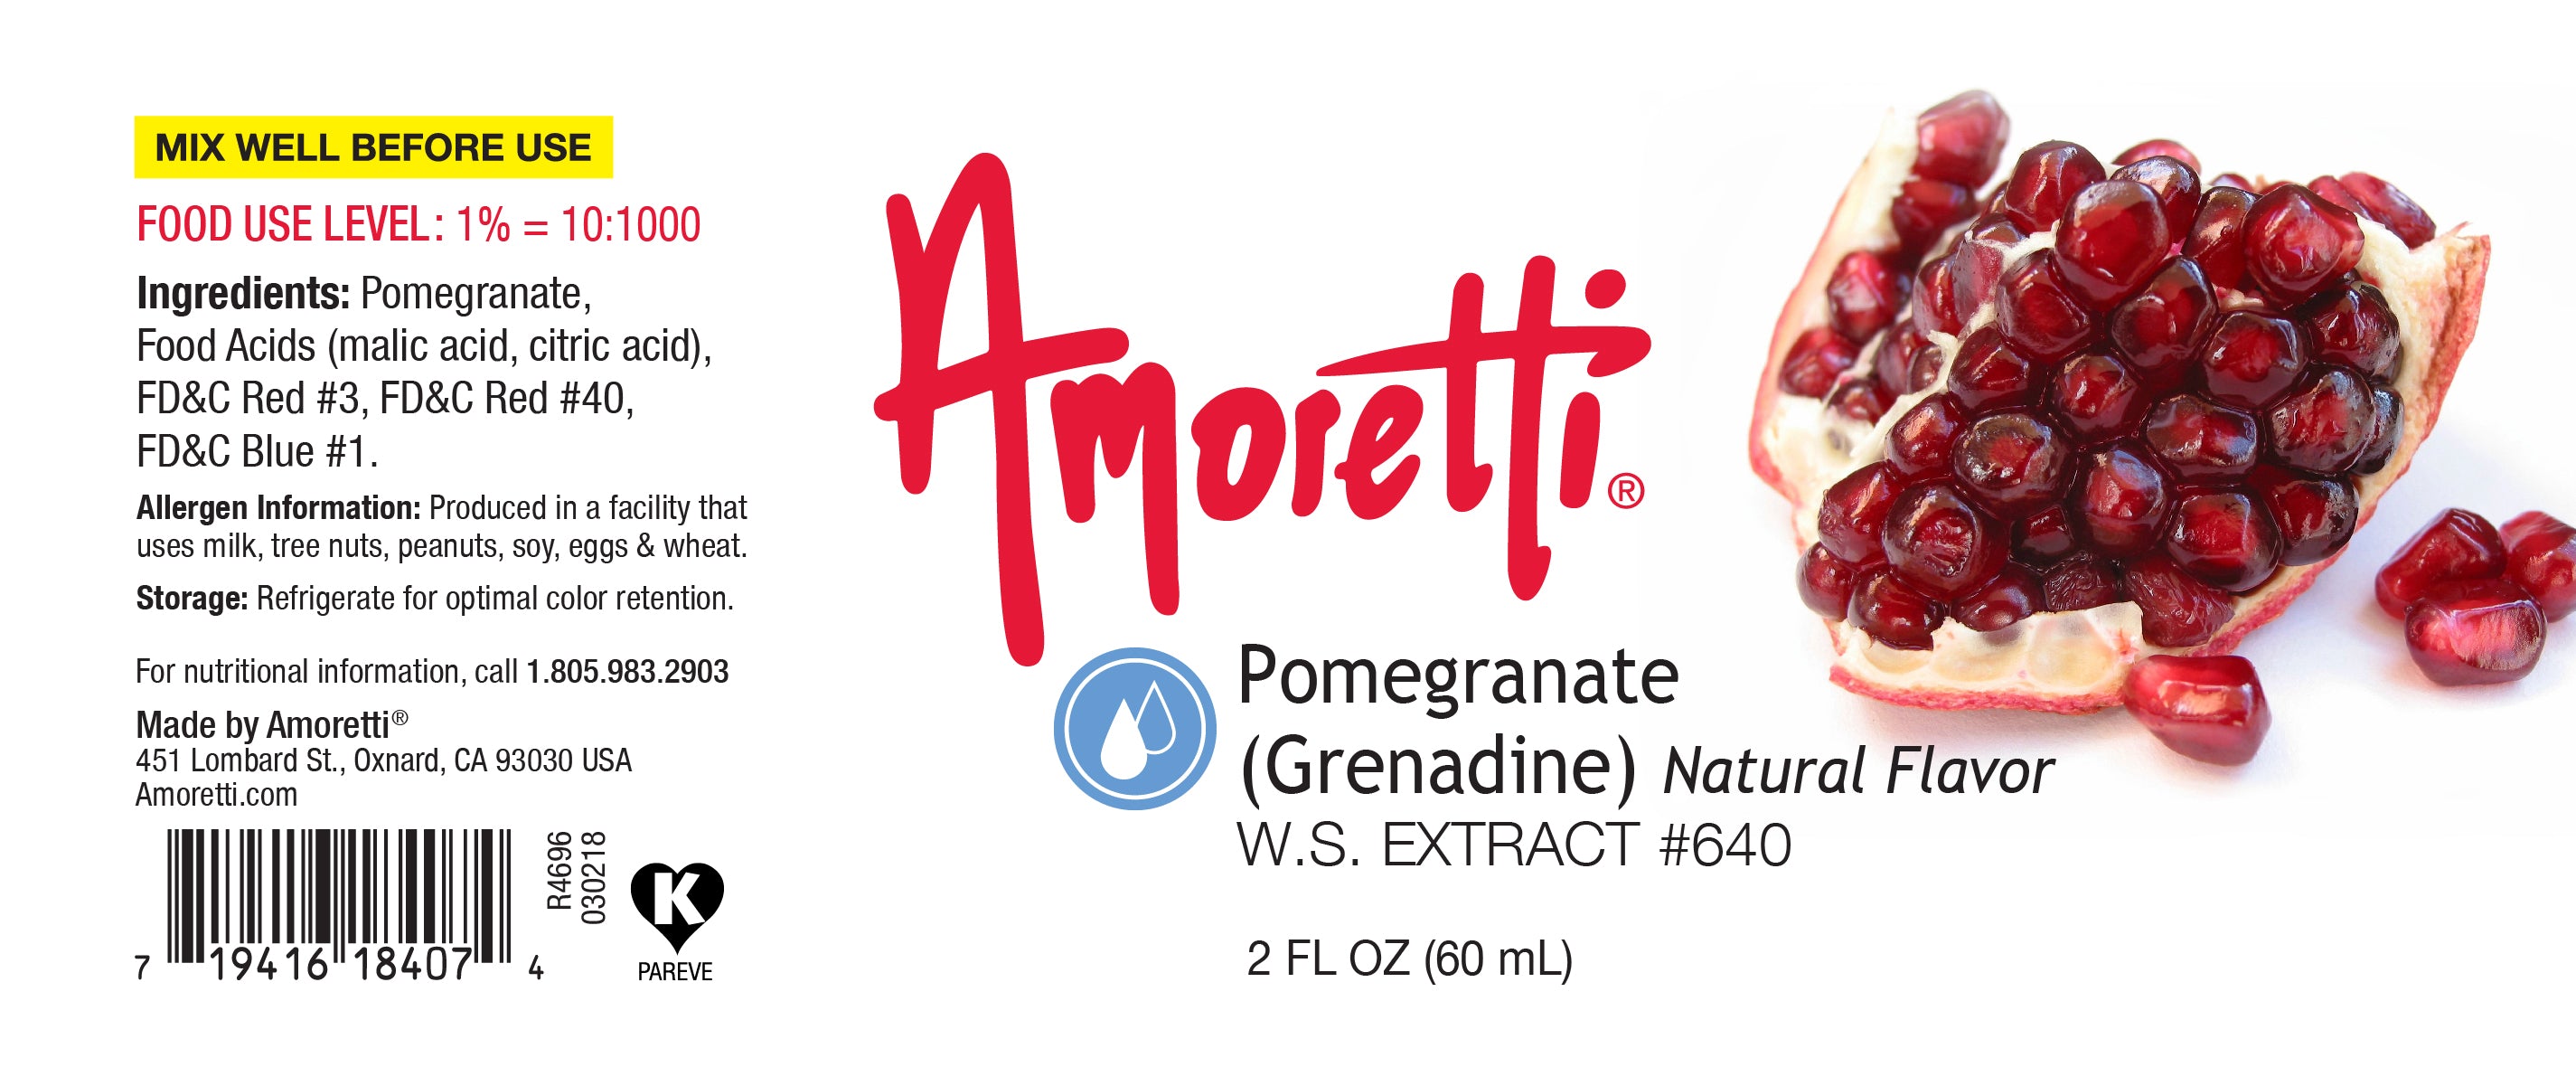 Pomegranate (Grenadine) Extract Water Soluble (natural flavor)